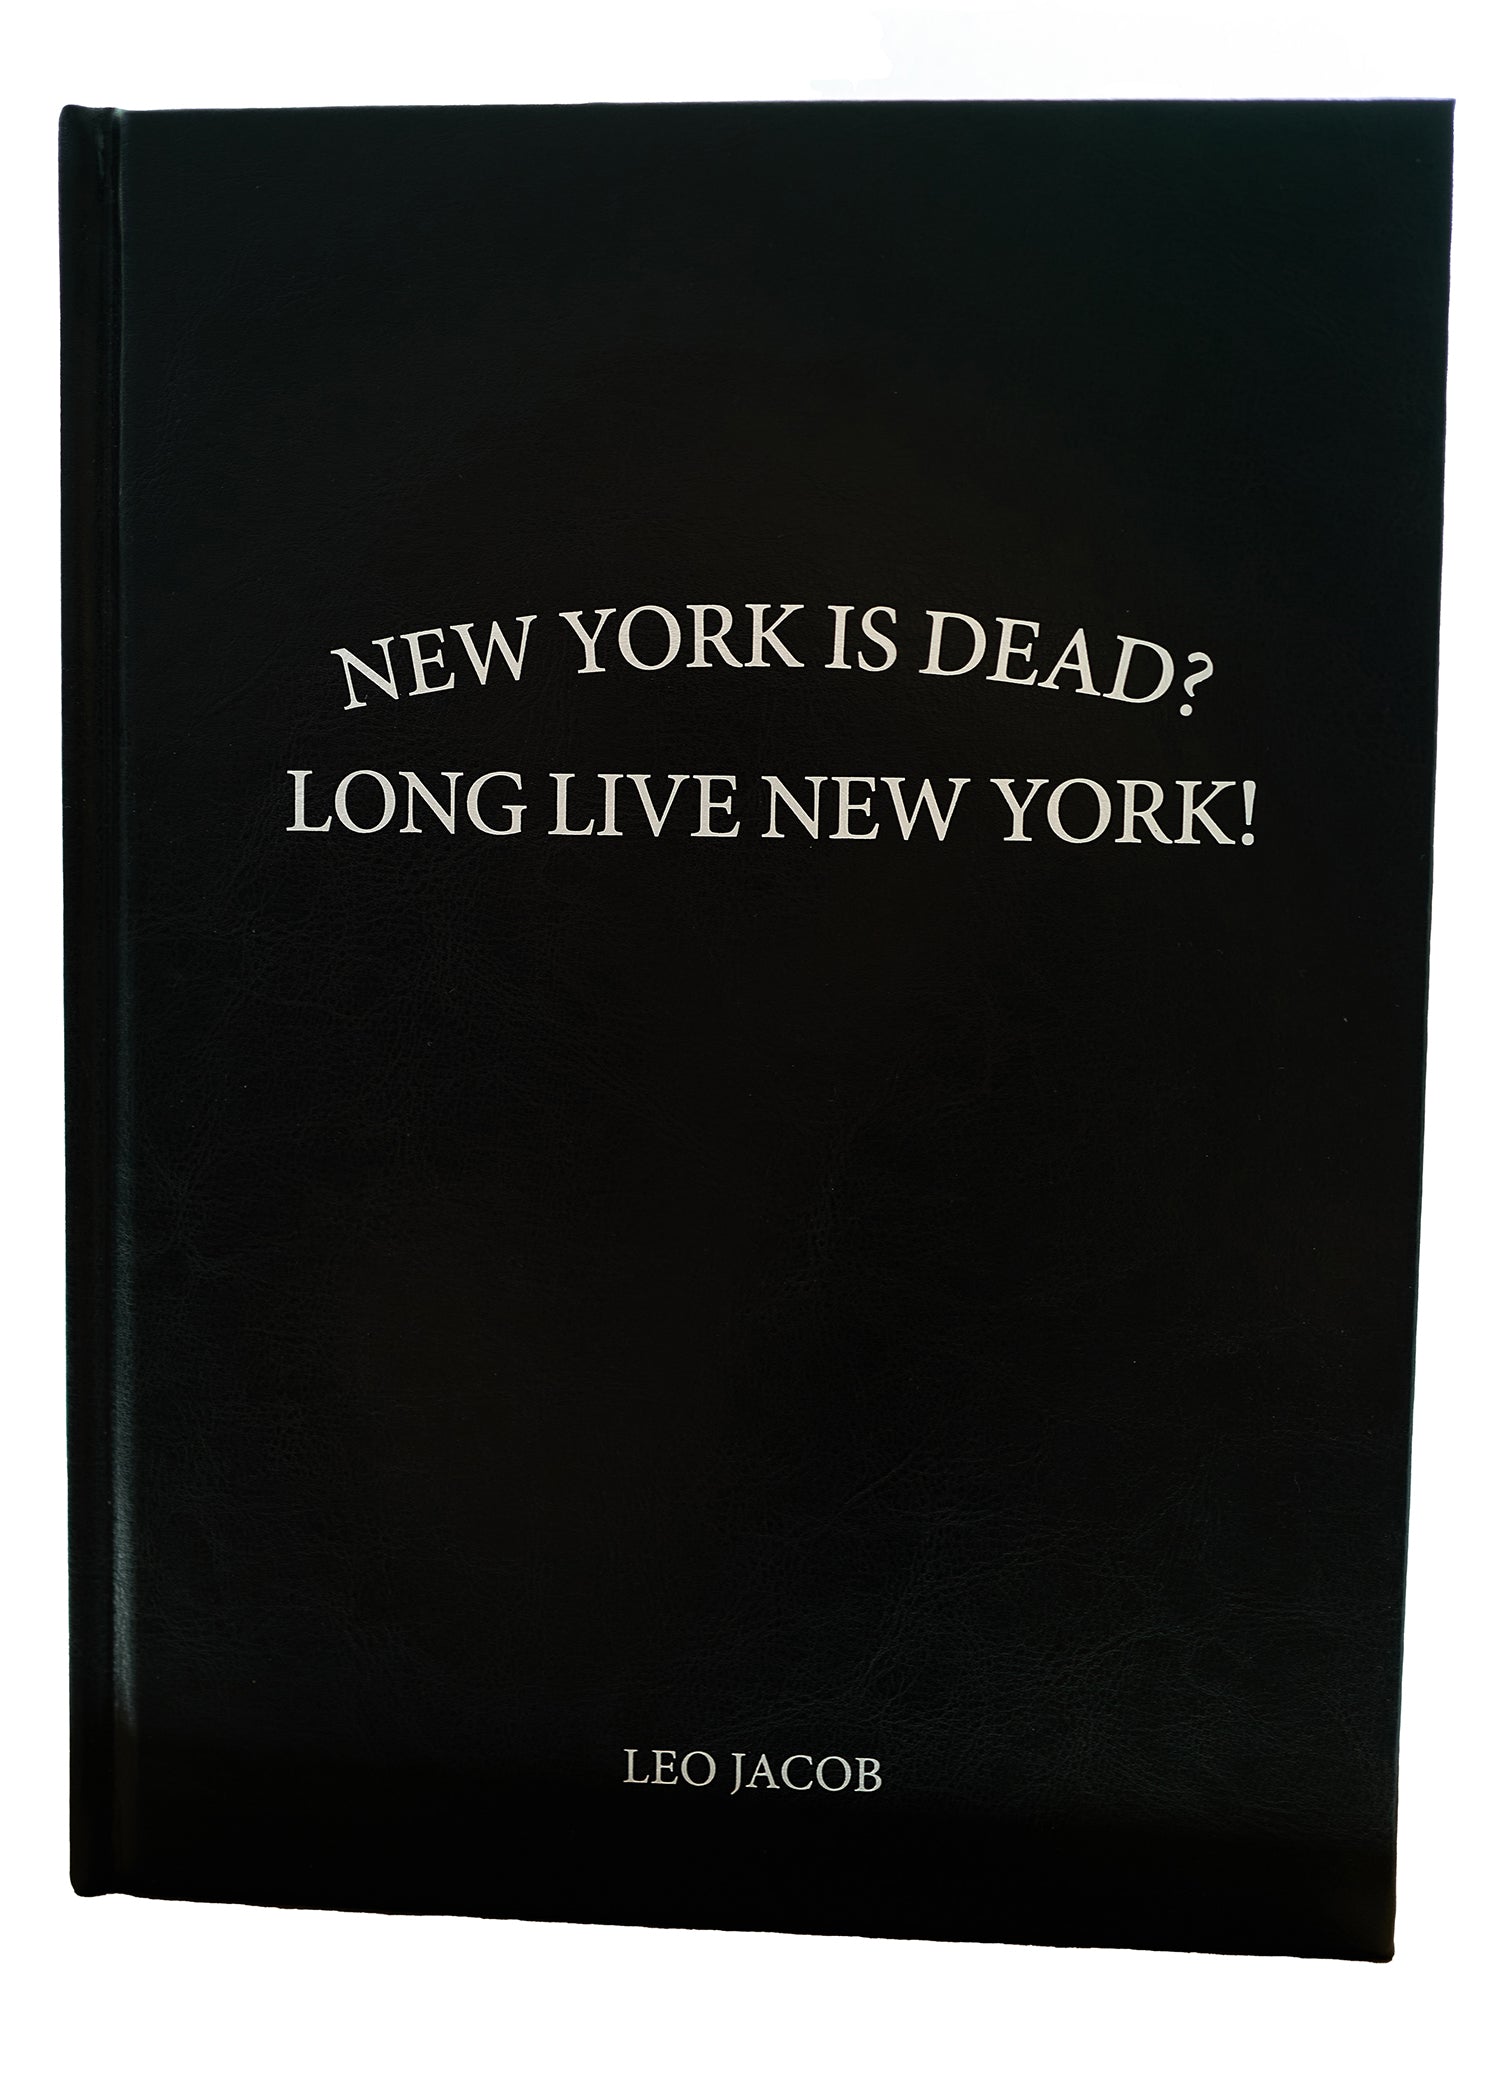 THE FIRST EDITION OF 